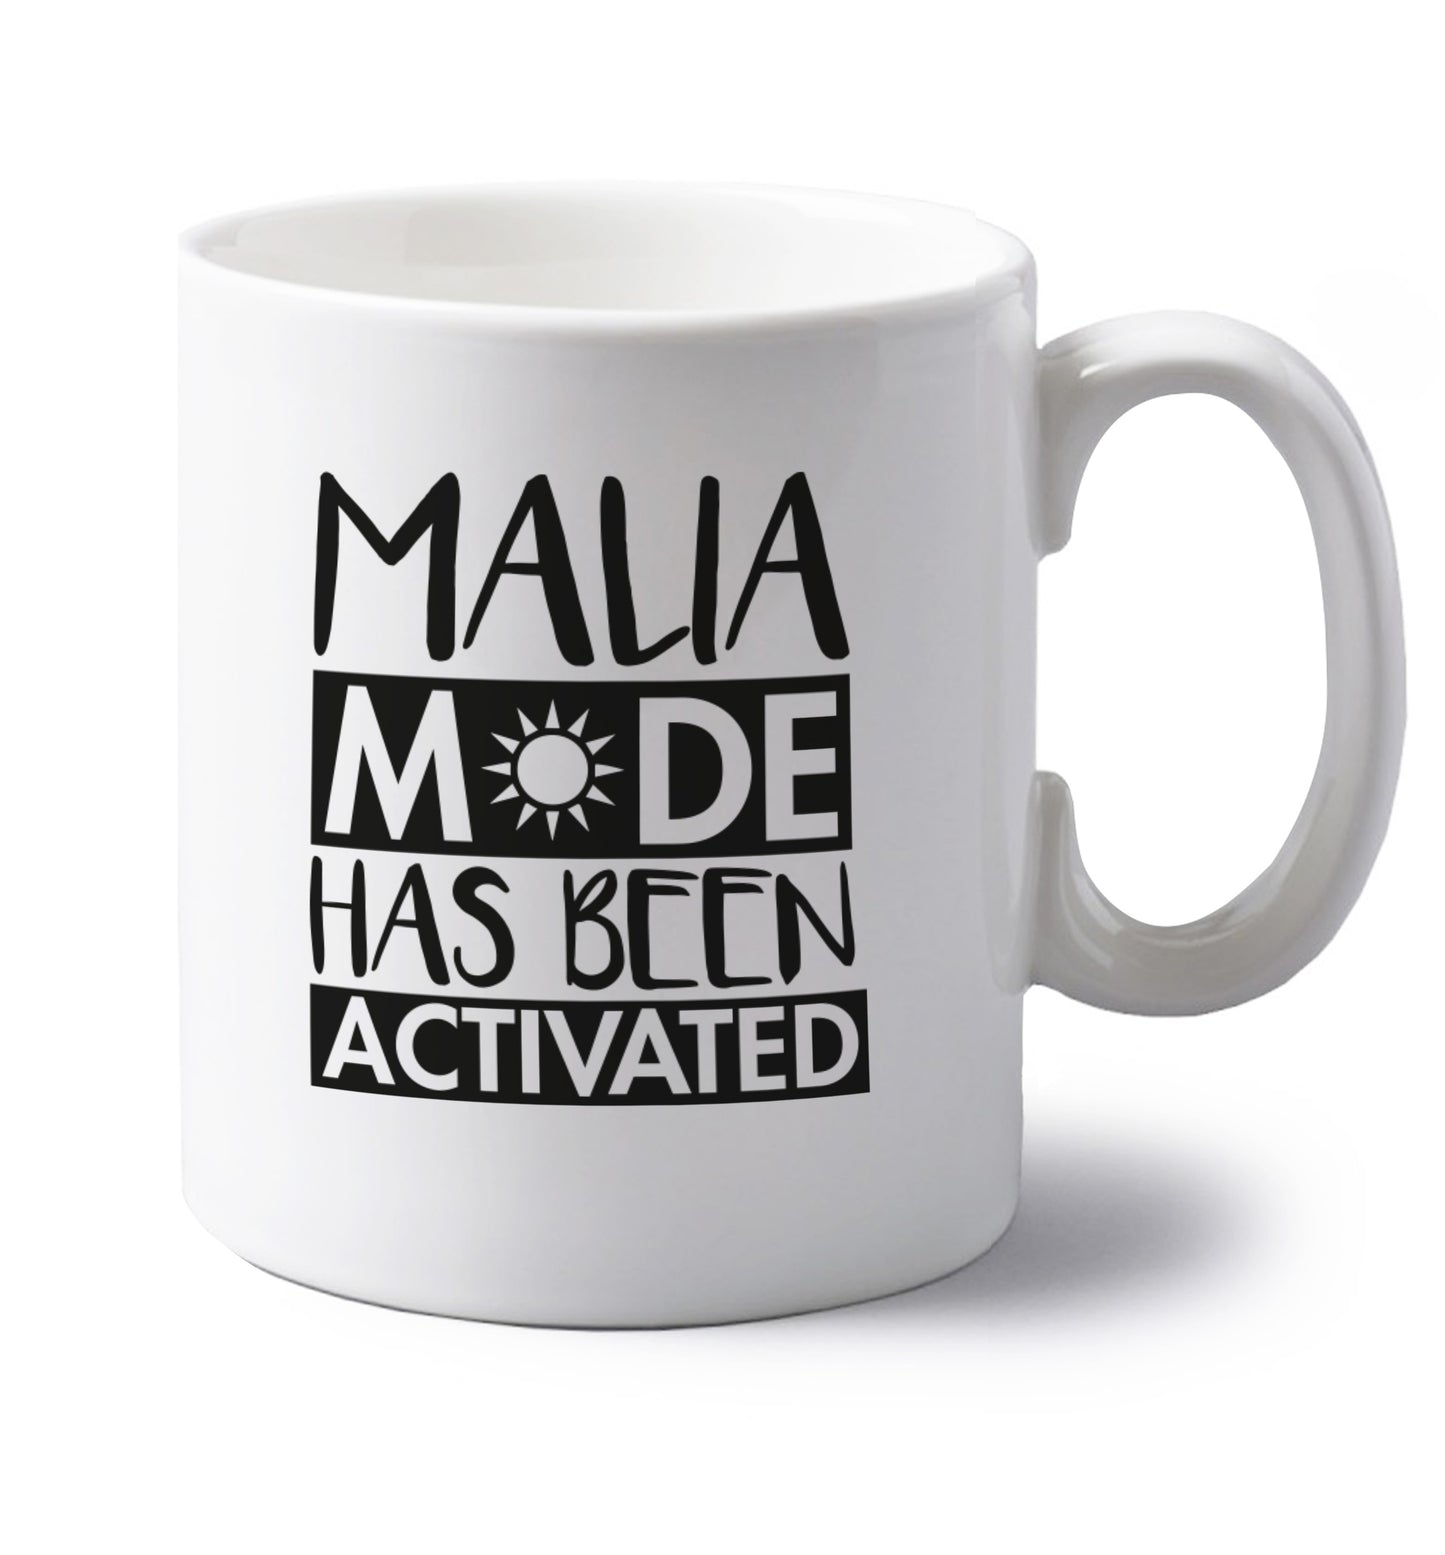 Malia mode has been activated left handed white ceramic mug 